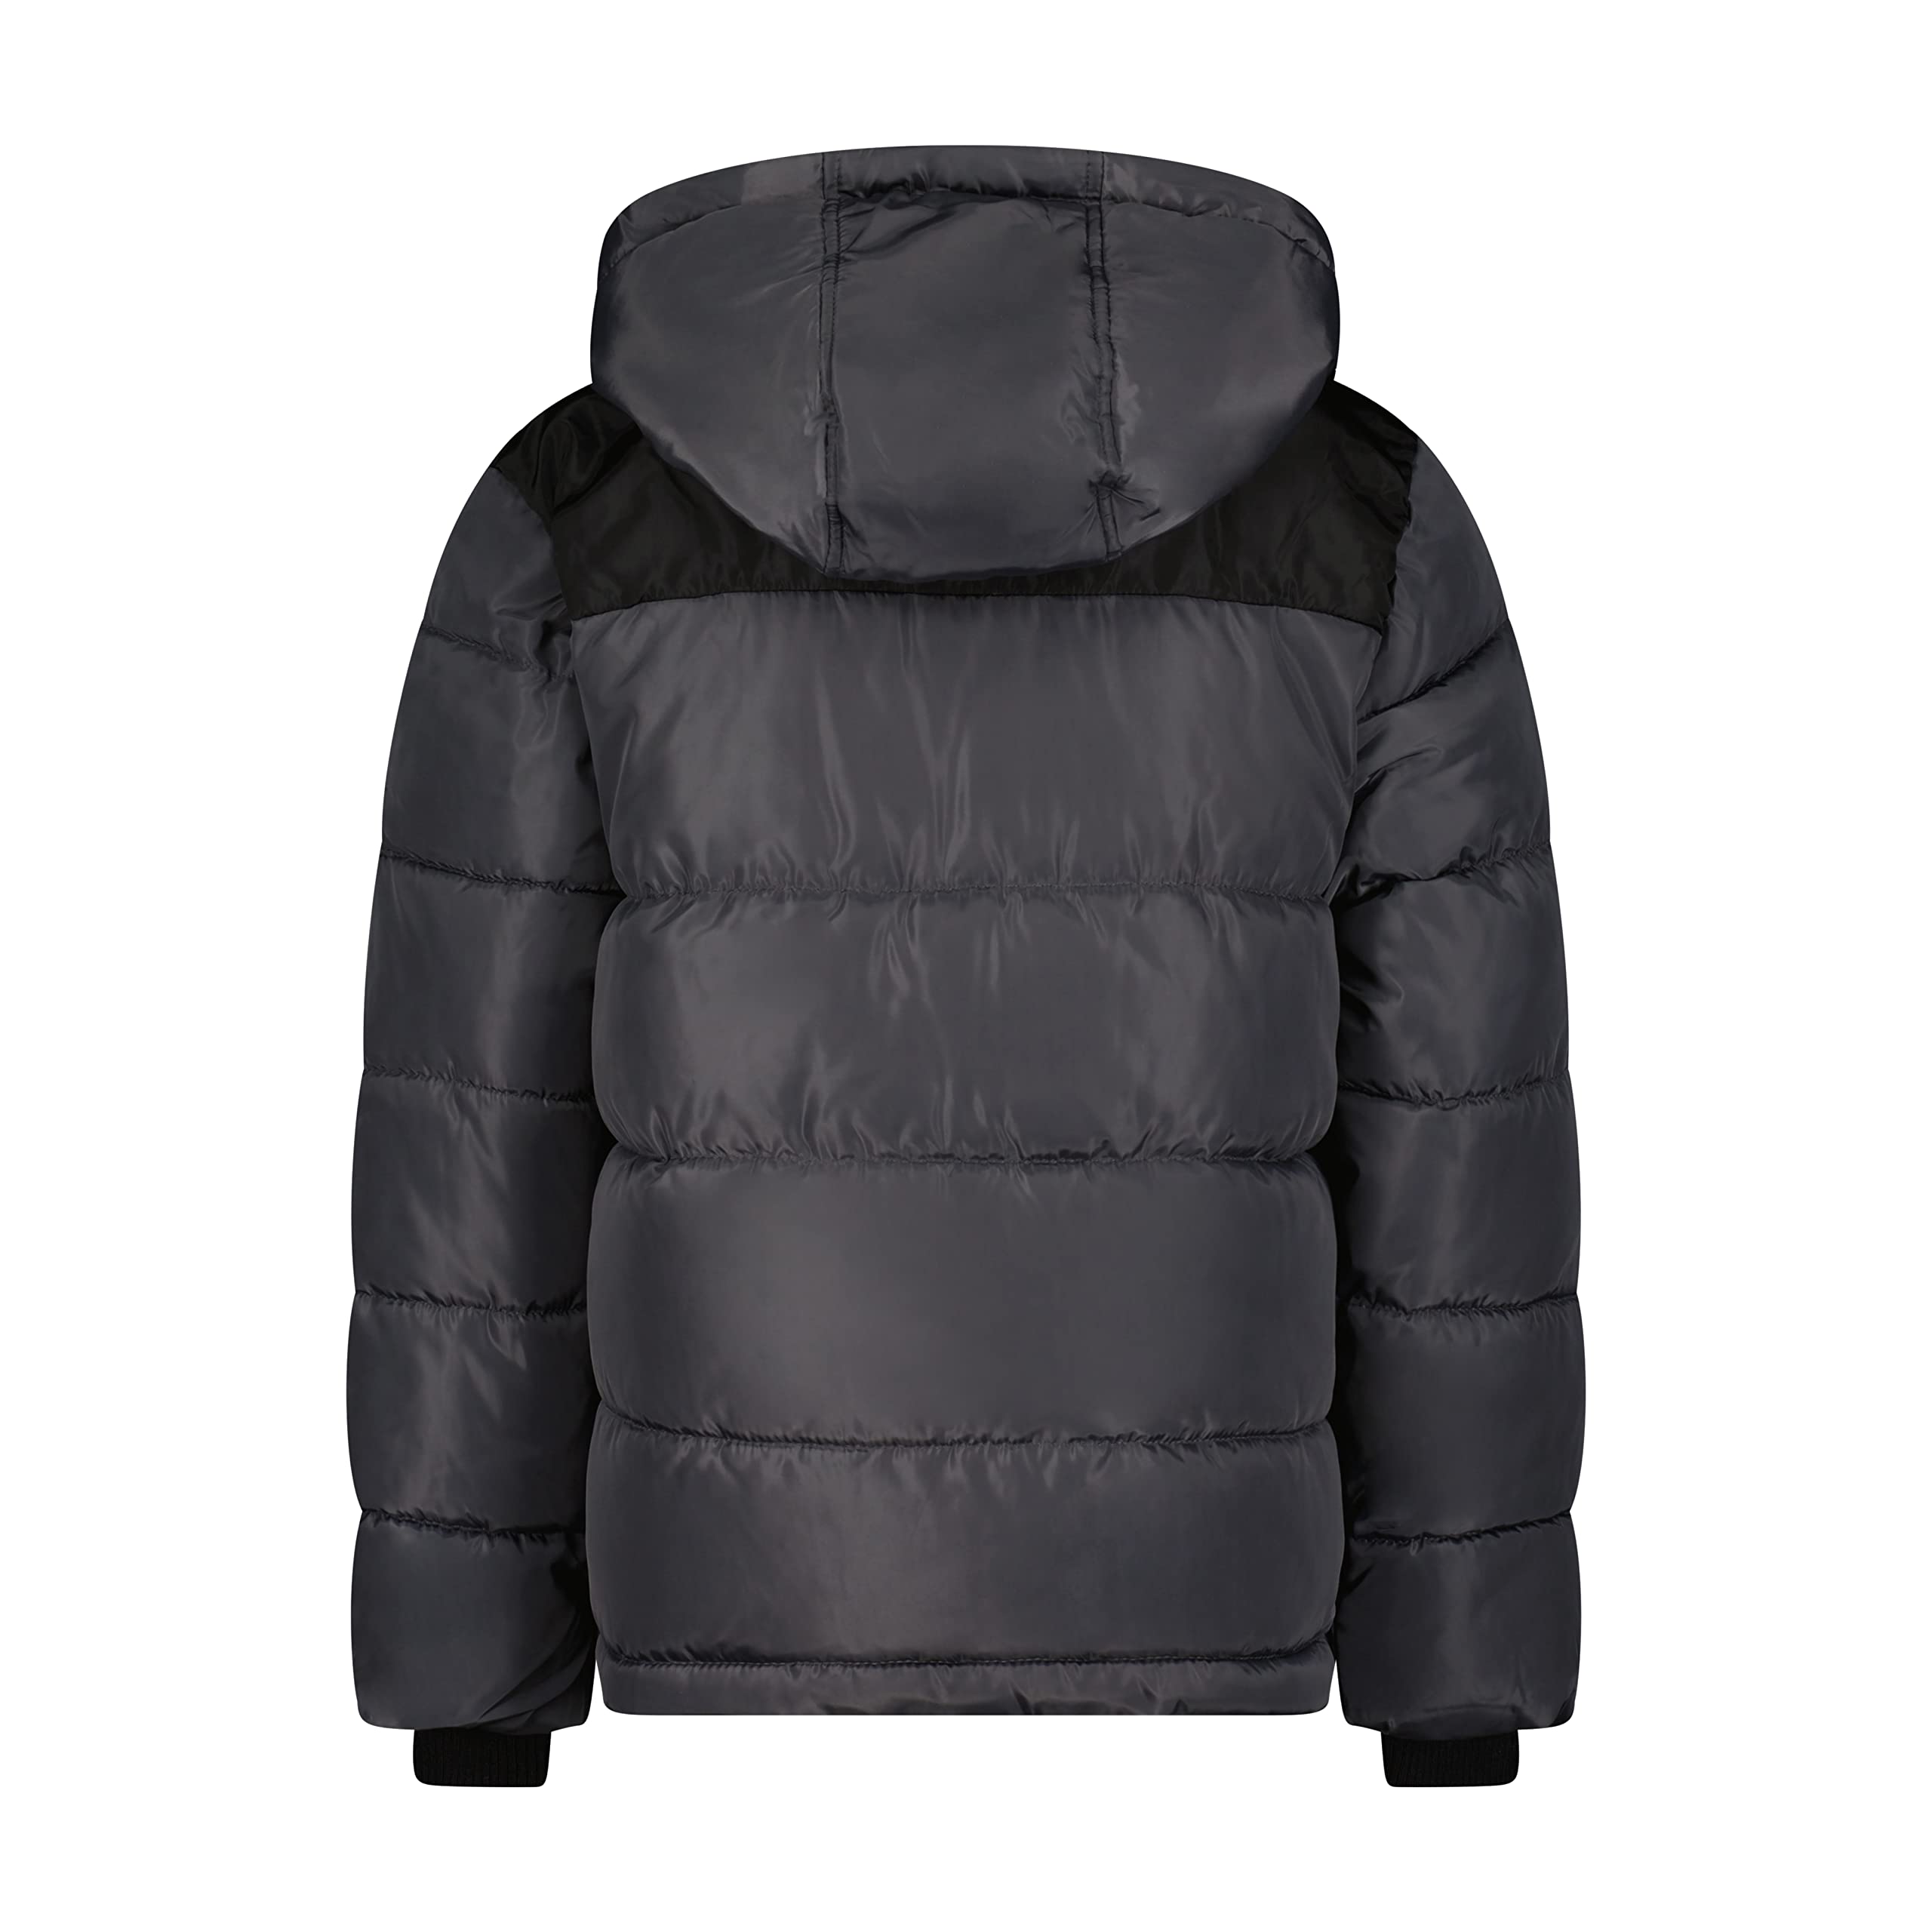 DKNY Boys' Classic Insulated Puffer Jacket